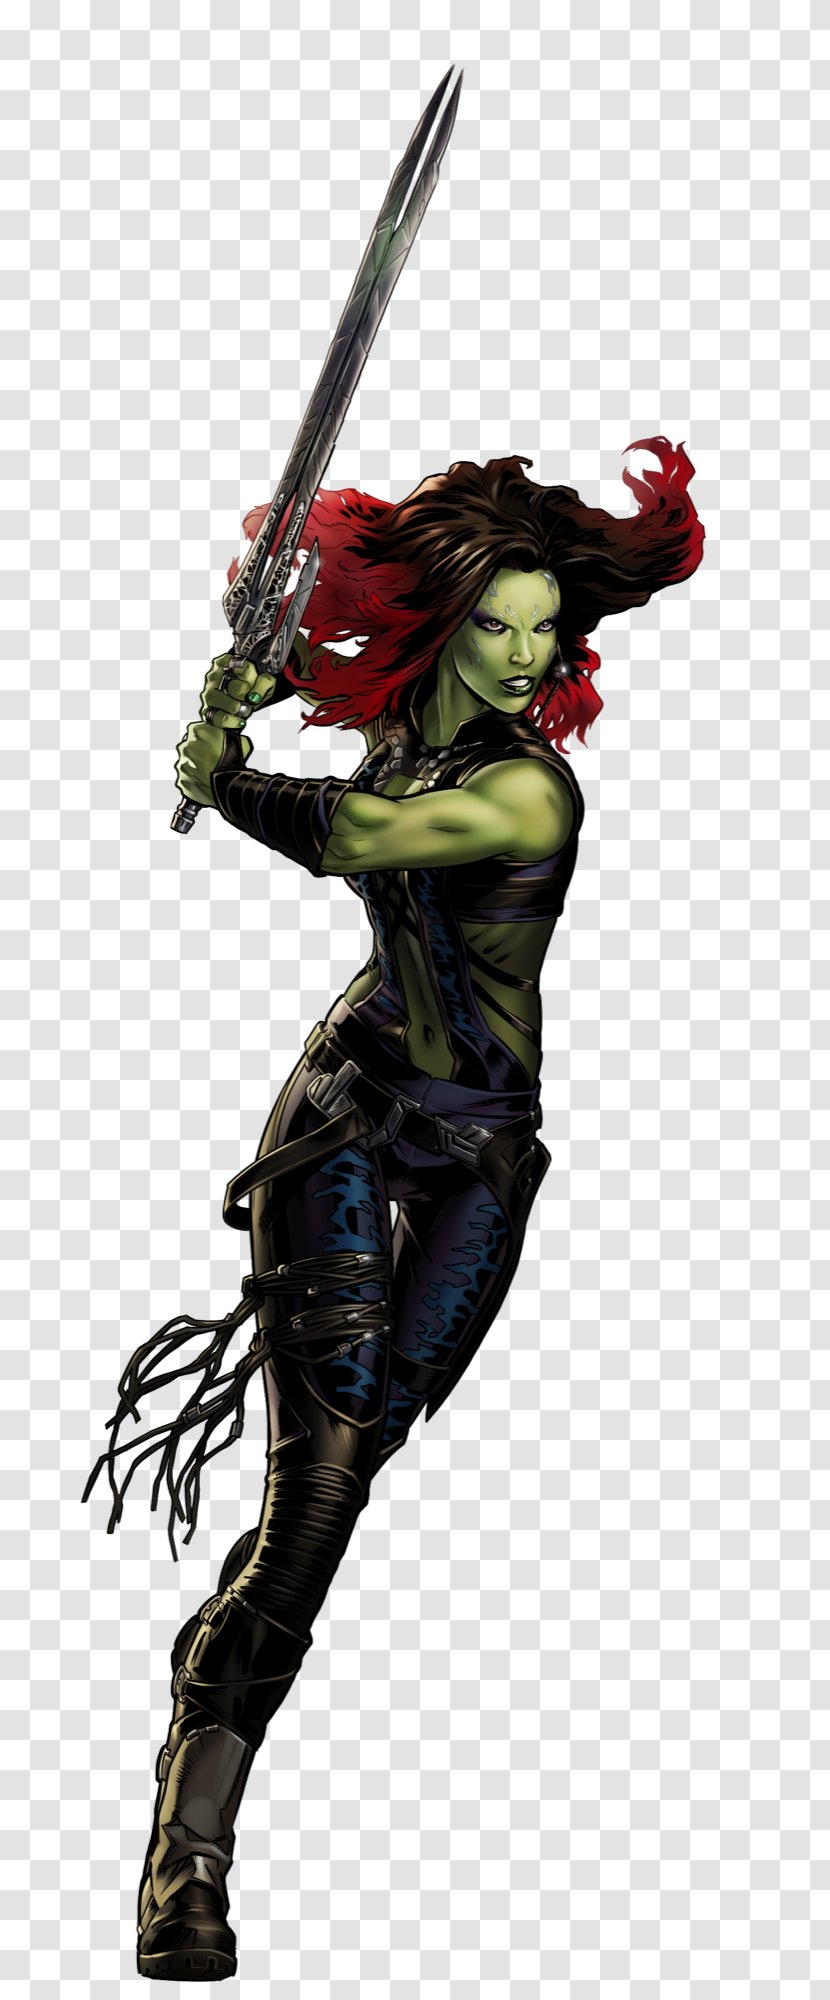 Marvel: Avengers Alliance Black Widow Gamora Guardians Of The Galaxy Thanos - Marvel Transparent PNG